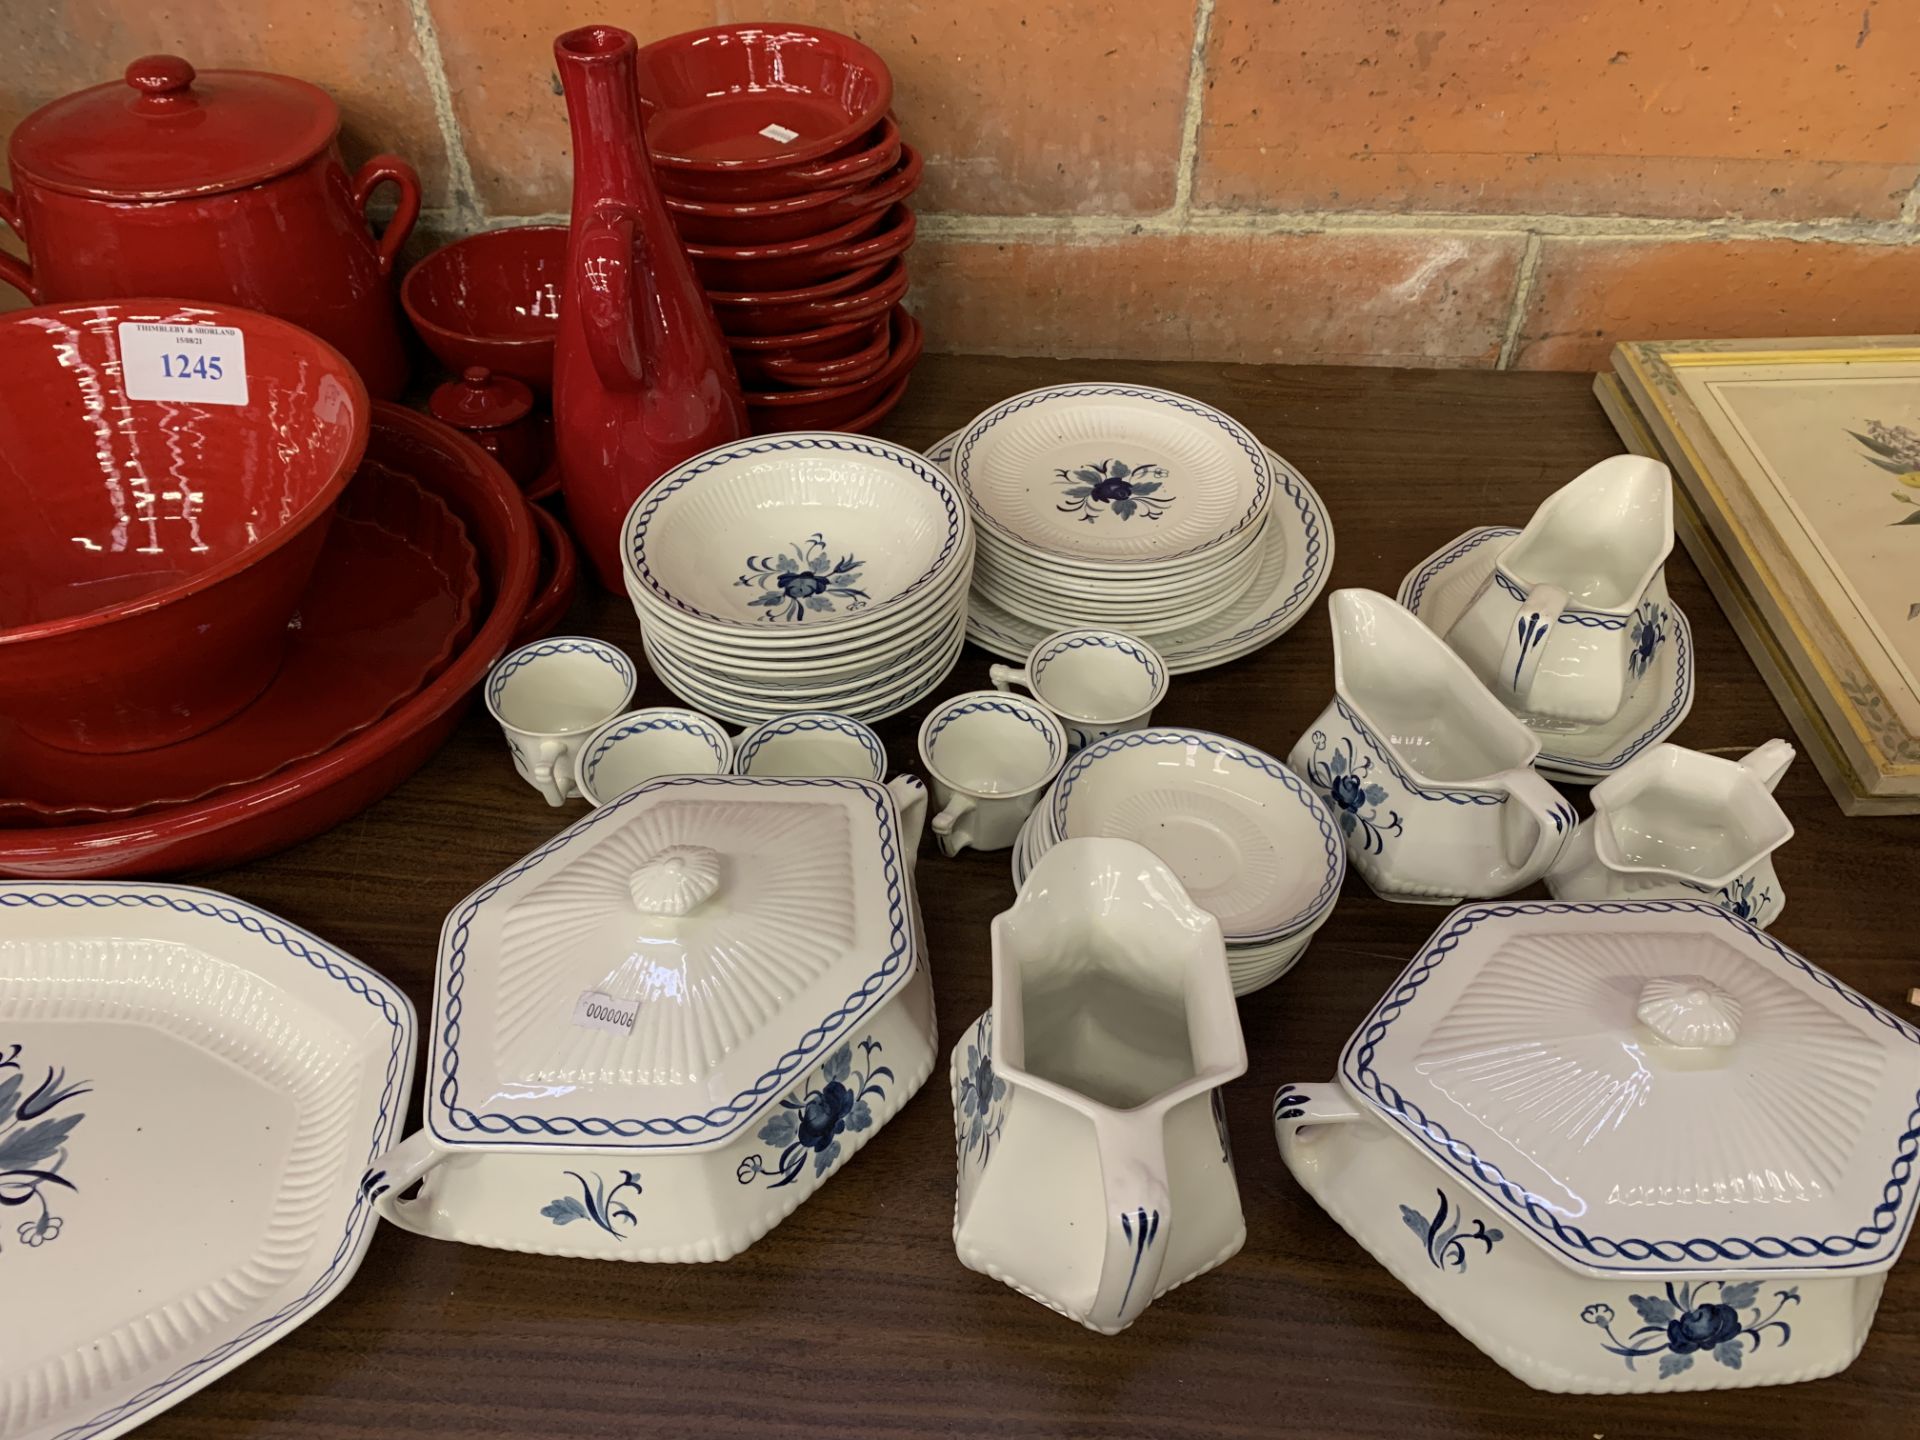 Adams 'Baltic' part dinner service together a with a quantity of Italian tableware